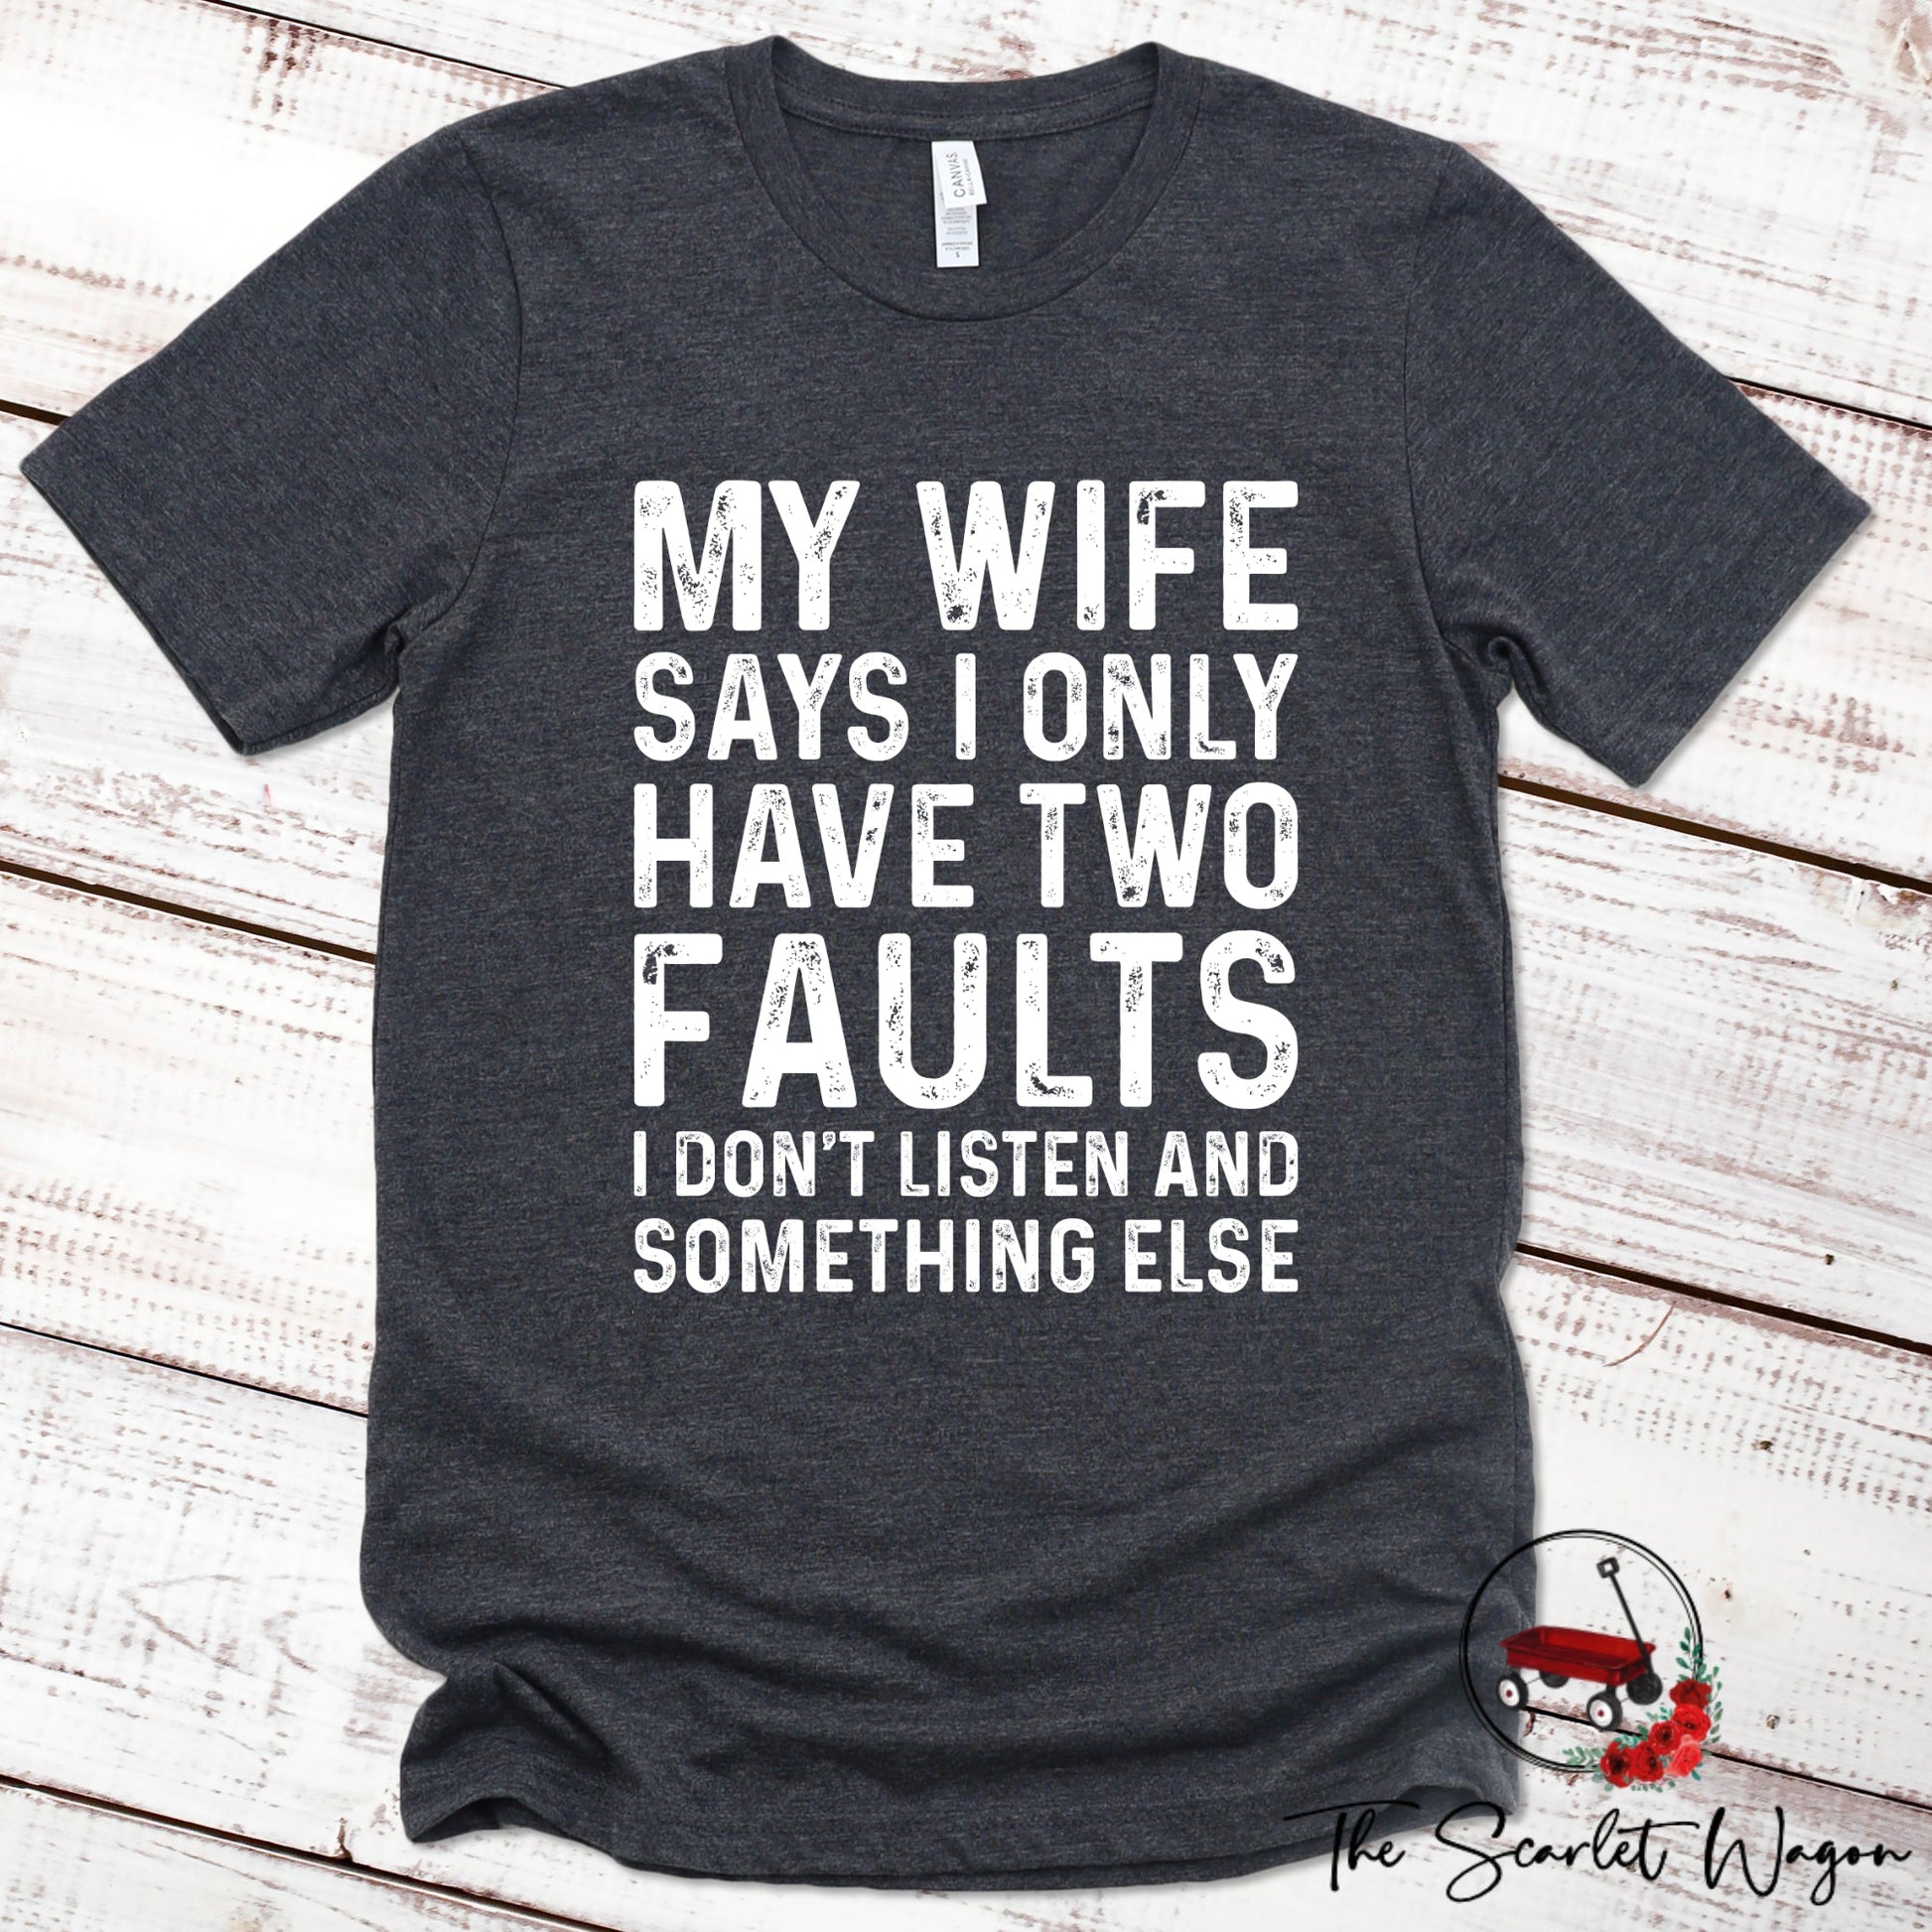 My Wife Says I Have Two Faults Premium Tee Scarlet Wagon Dark Gray Heather XS 